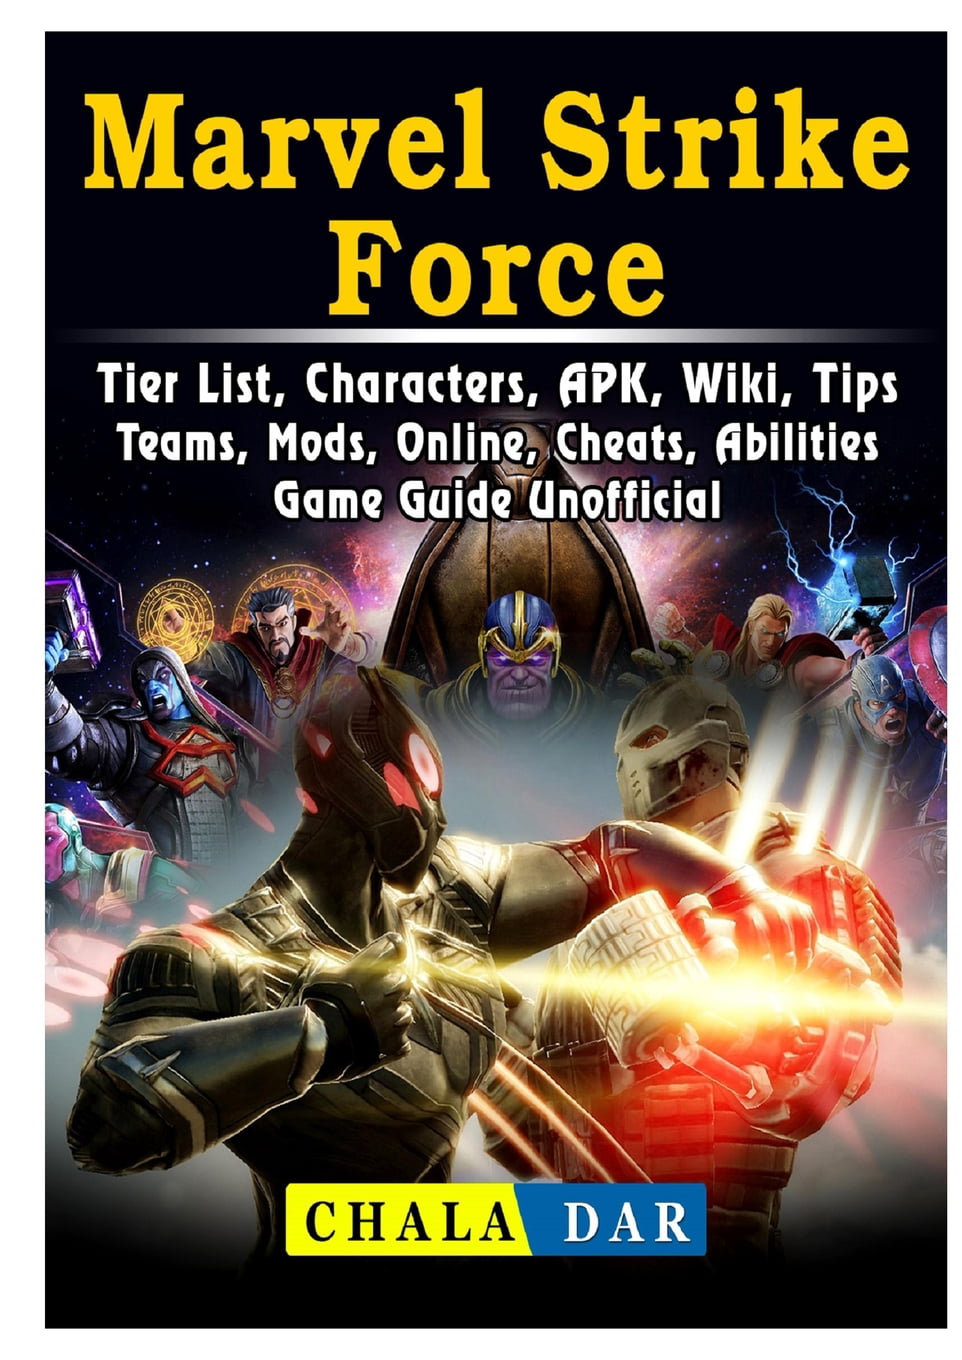 Marvel Strike Force, Reddit, Tier List, APK, IOS, Mods, Thanos, Cheats,  Tips, Game Guide Unofficial on Apple Books